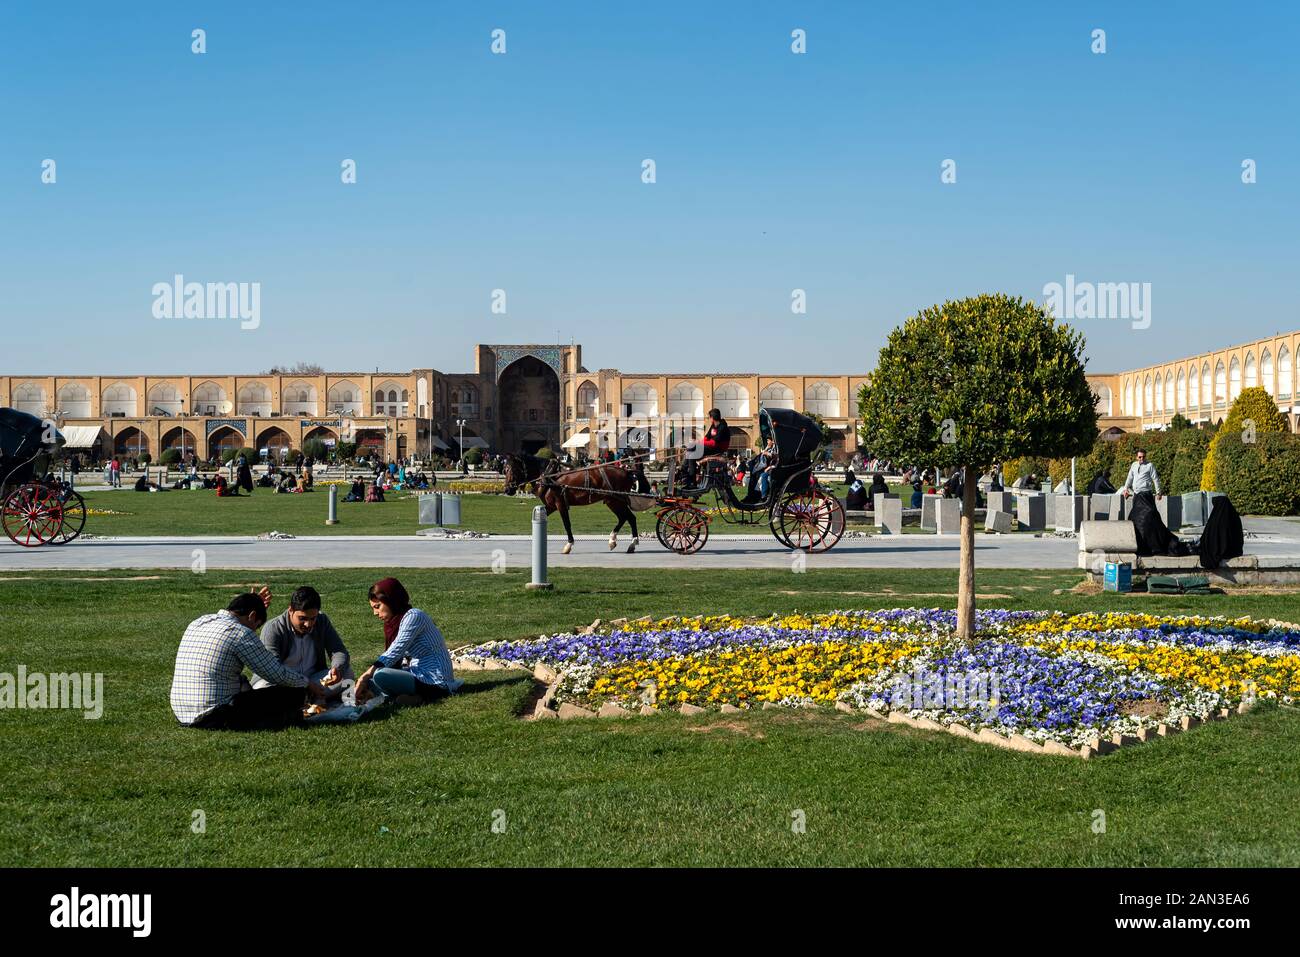 March 2, 2019: Iranian people resting and having a pic nic on the grass at Naghsh-e Jahan Square. Isfahan, Iran Stock Photo